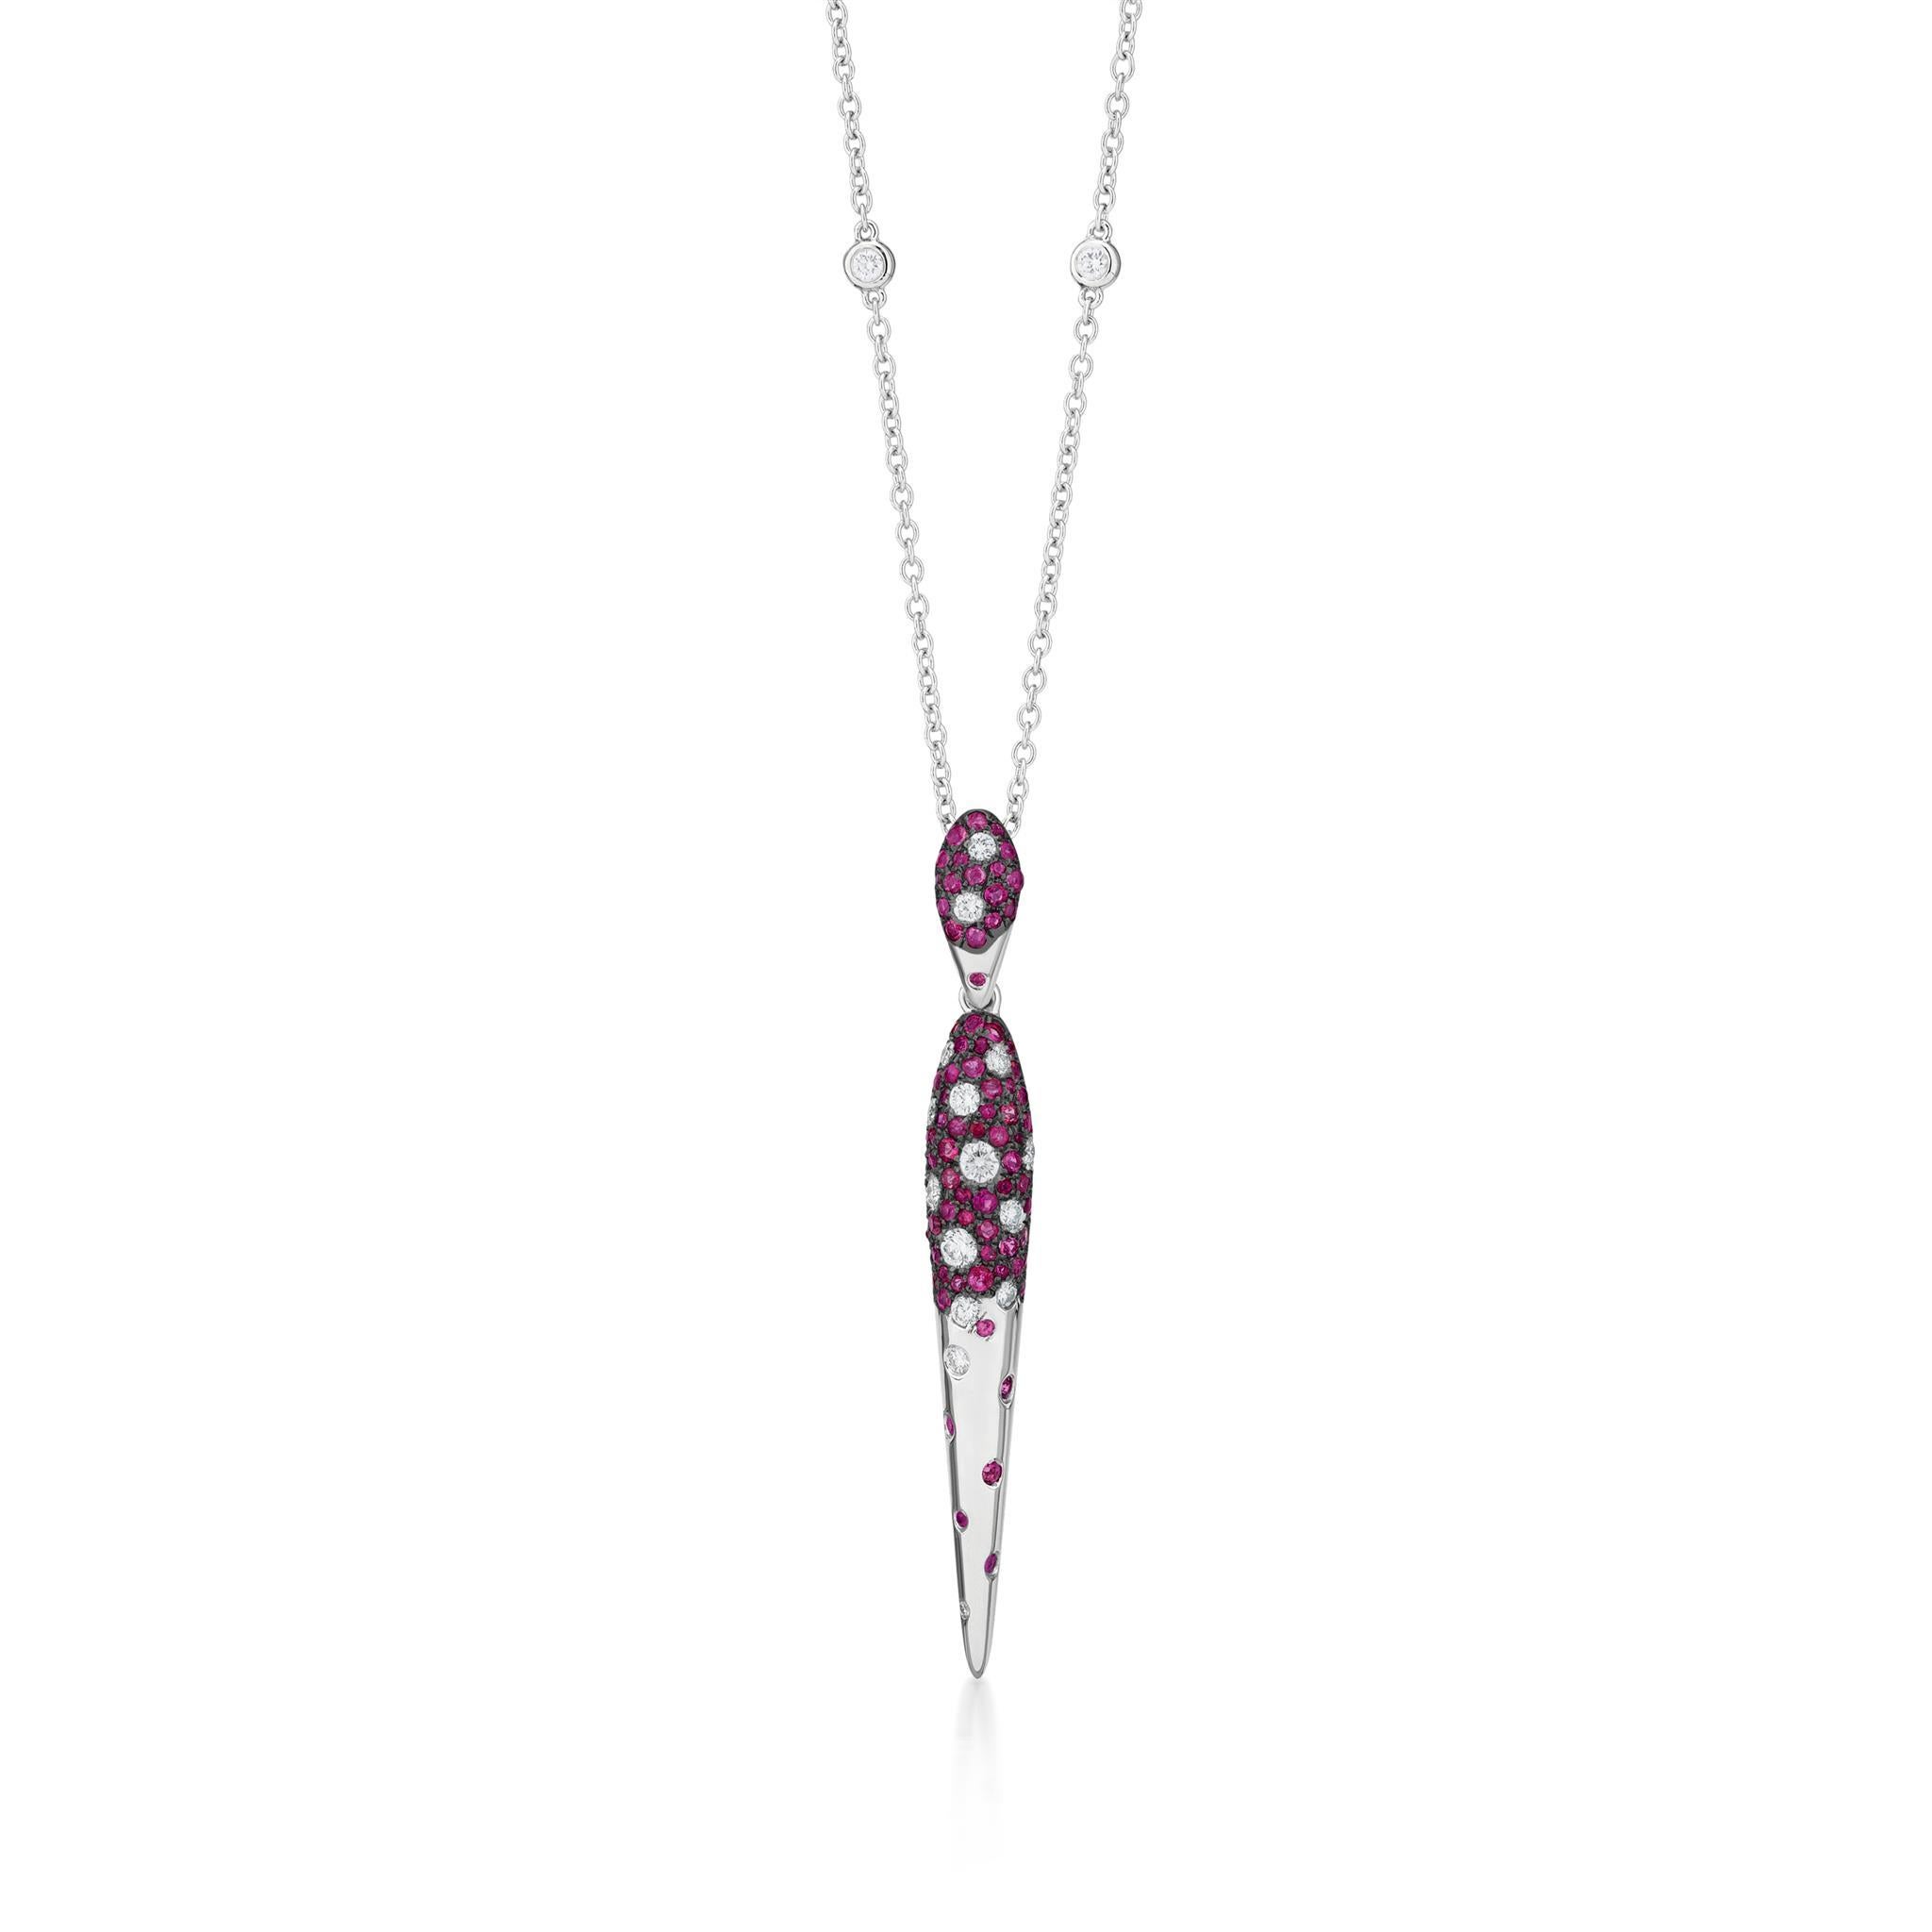 Elevate your elegance with the exquisite Luxle 1.36 Cttw. Ruby and Diamond Serpentine Pendant Necklace in 18K White Gold and Black Rhodium. A true masterpiece that seamlessly blends artistry with luxury, this necklace captures the allure of a